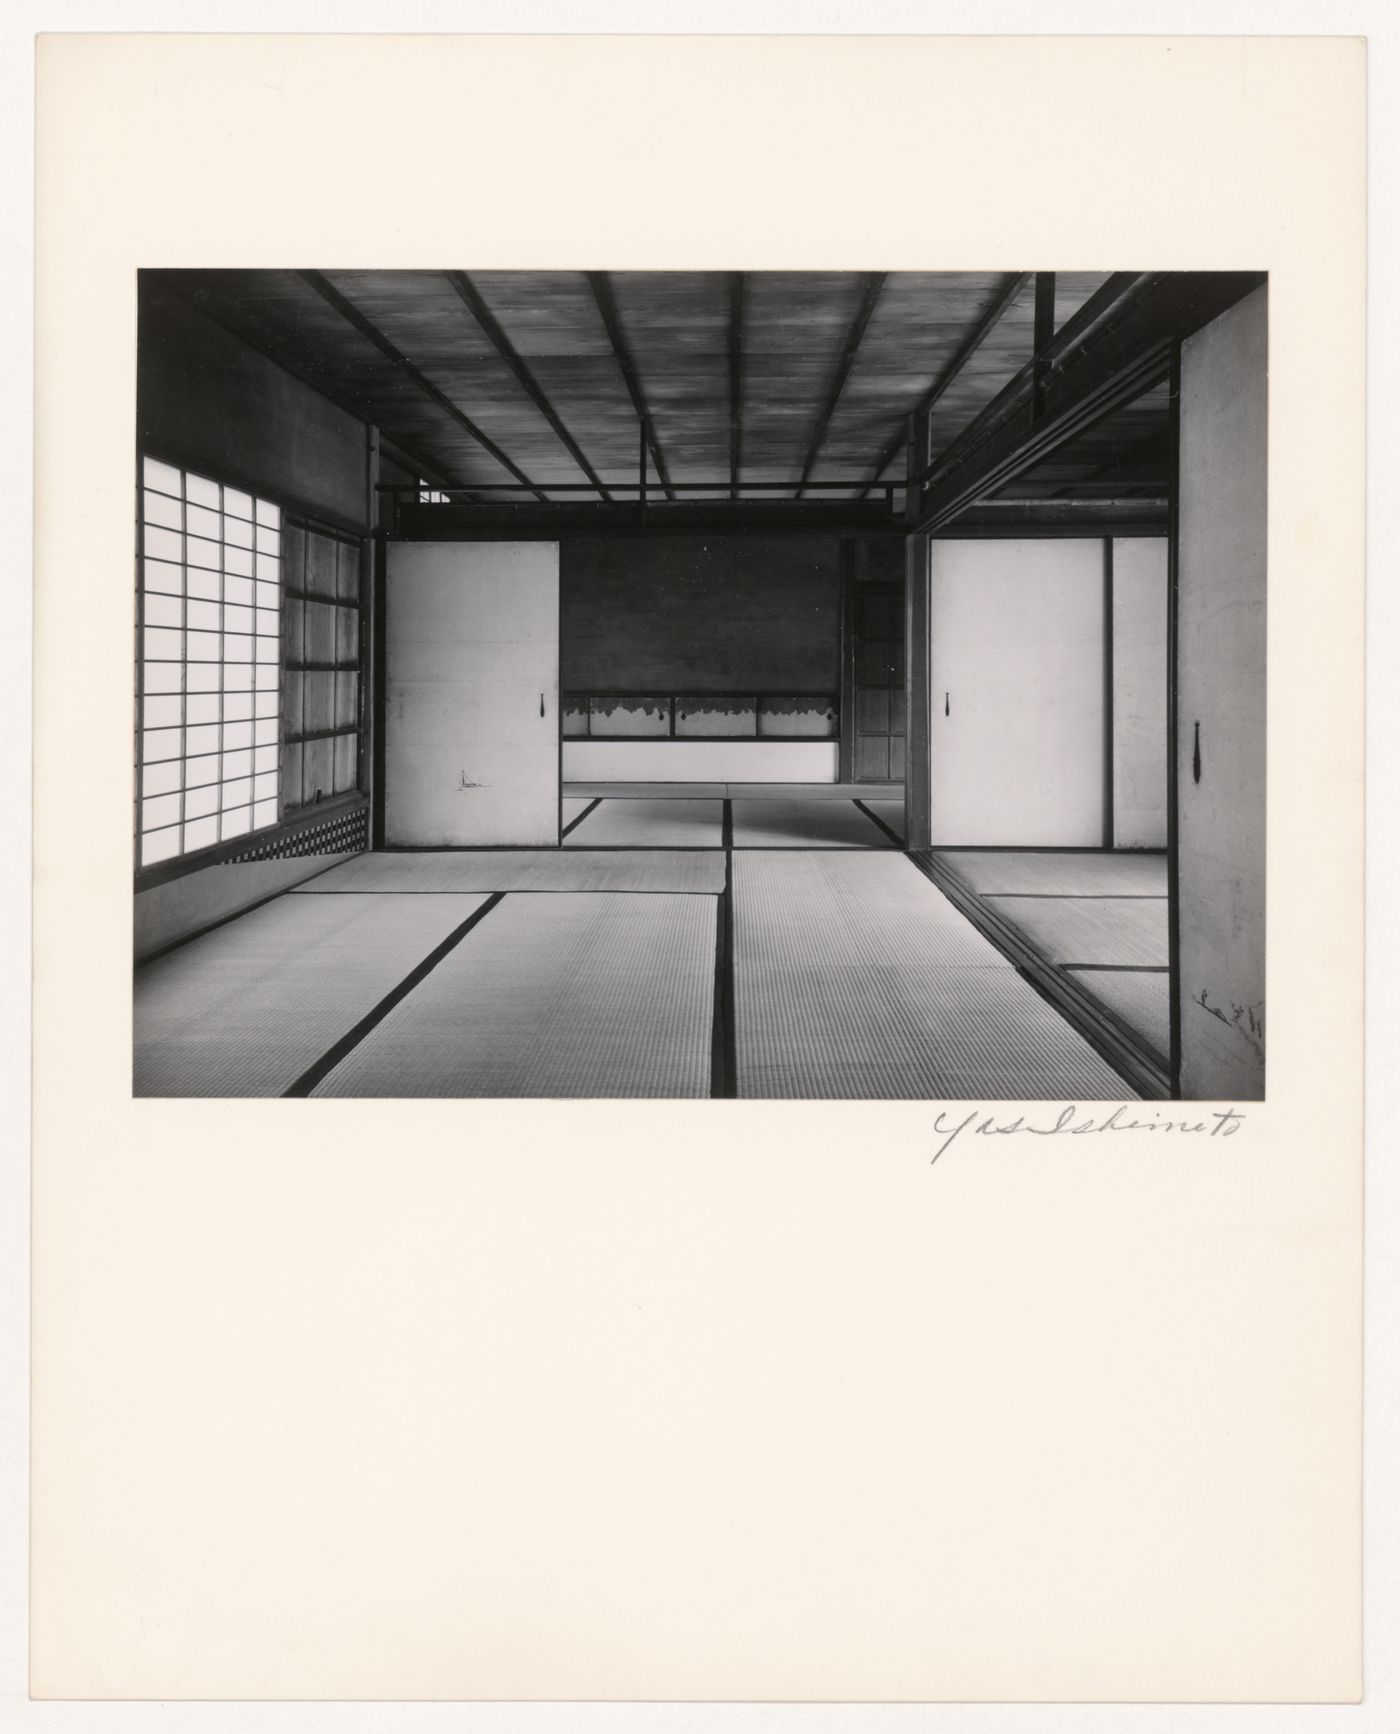 Interior view of the Shoiken showing the Second Room (also known as the Middle Room) in the foreground and the Third Room (also known as the Anteroom) in the background, Katsura Rikyu (also known as Katsura Imperial Villa), Kyoto, Japan